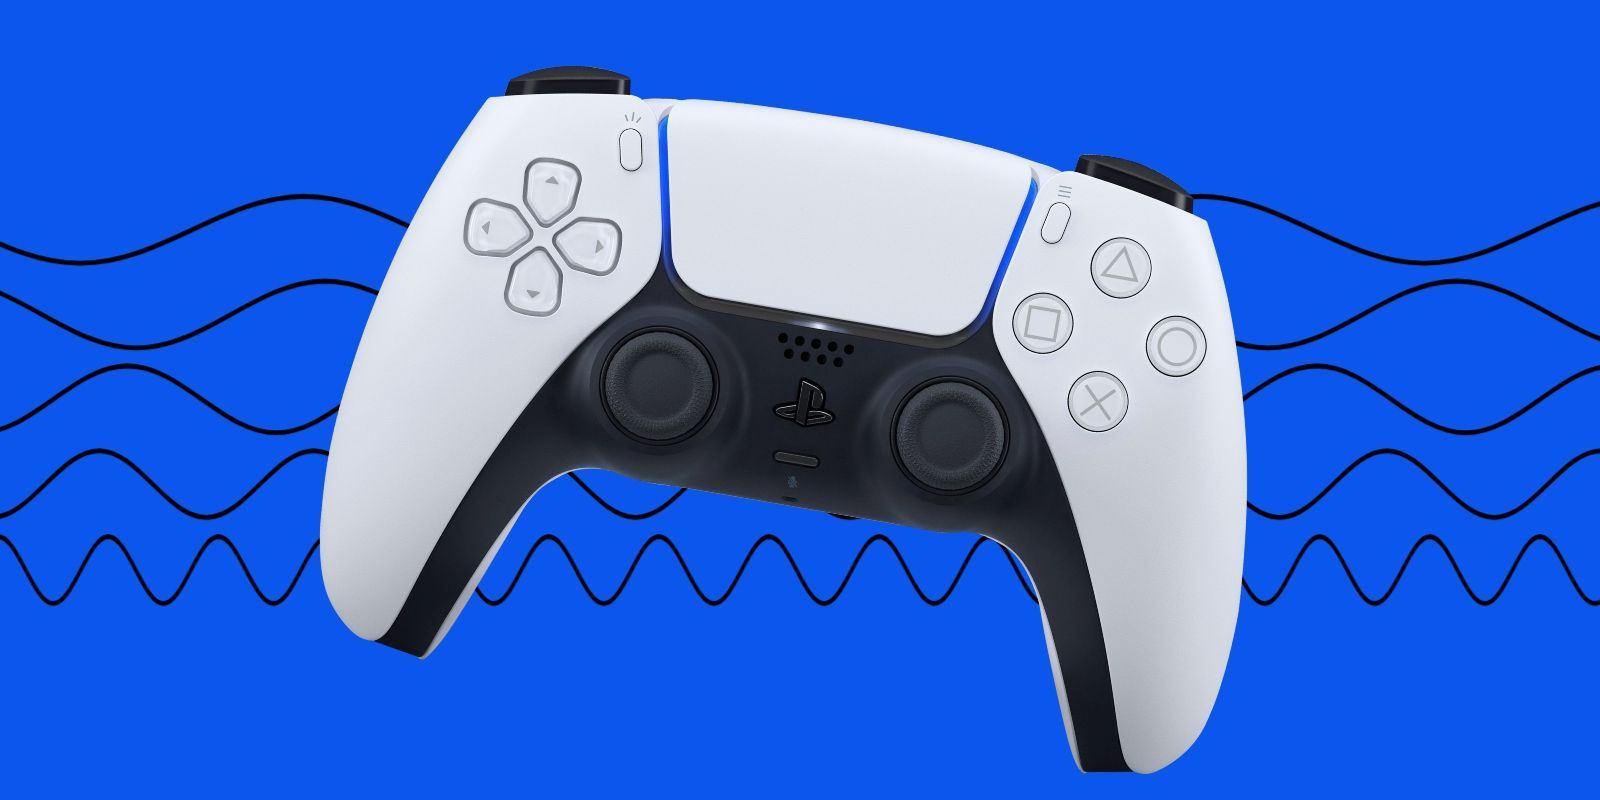  A white and black gaming controller with trigger buttons, stereo speakers, and haptic feedback is shown on a blue background with wavy lines.